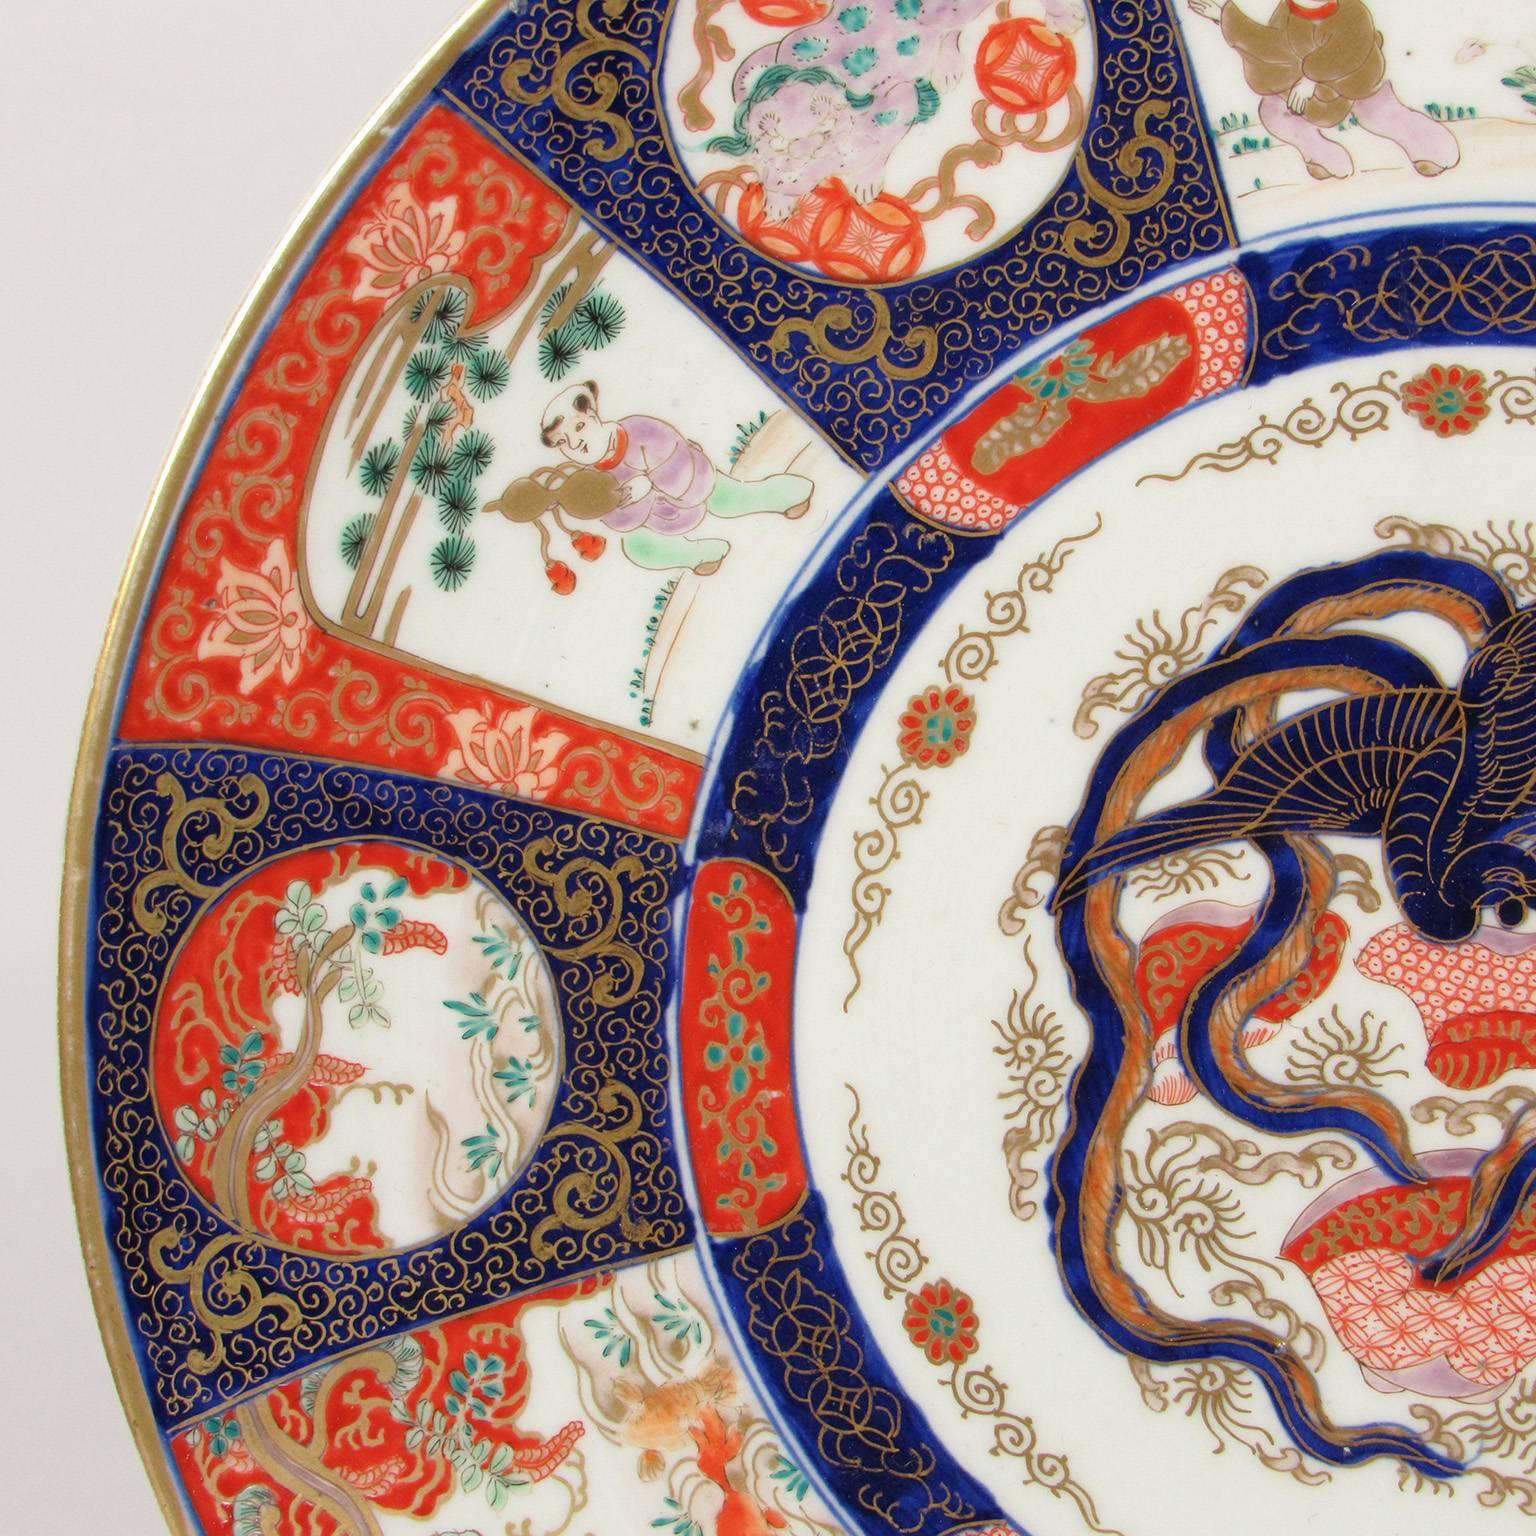 19th Century Japanese Imari Charger In Good Condition For Sale In Concord, MA